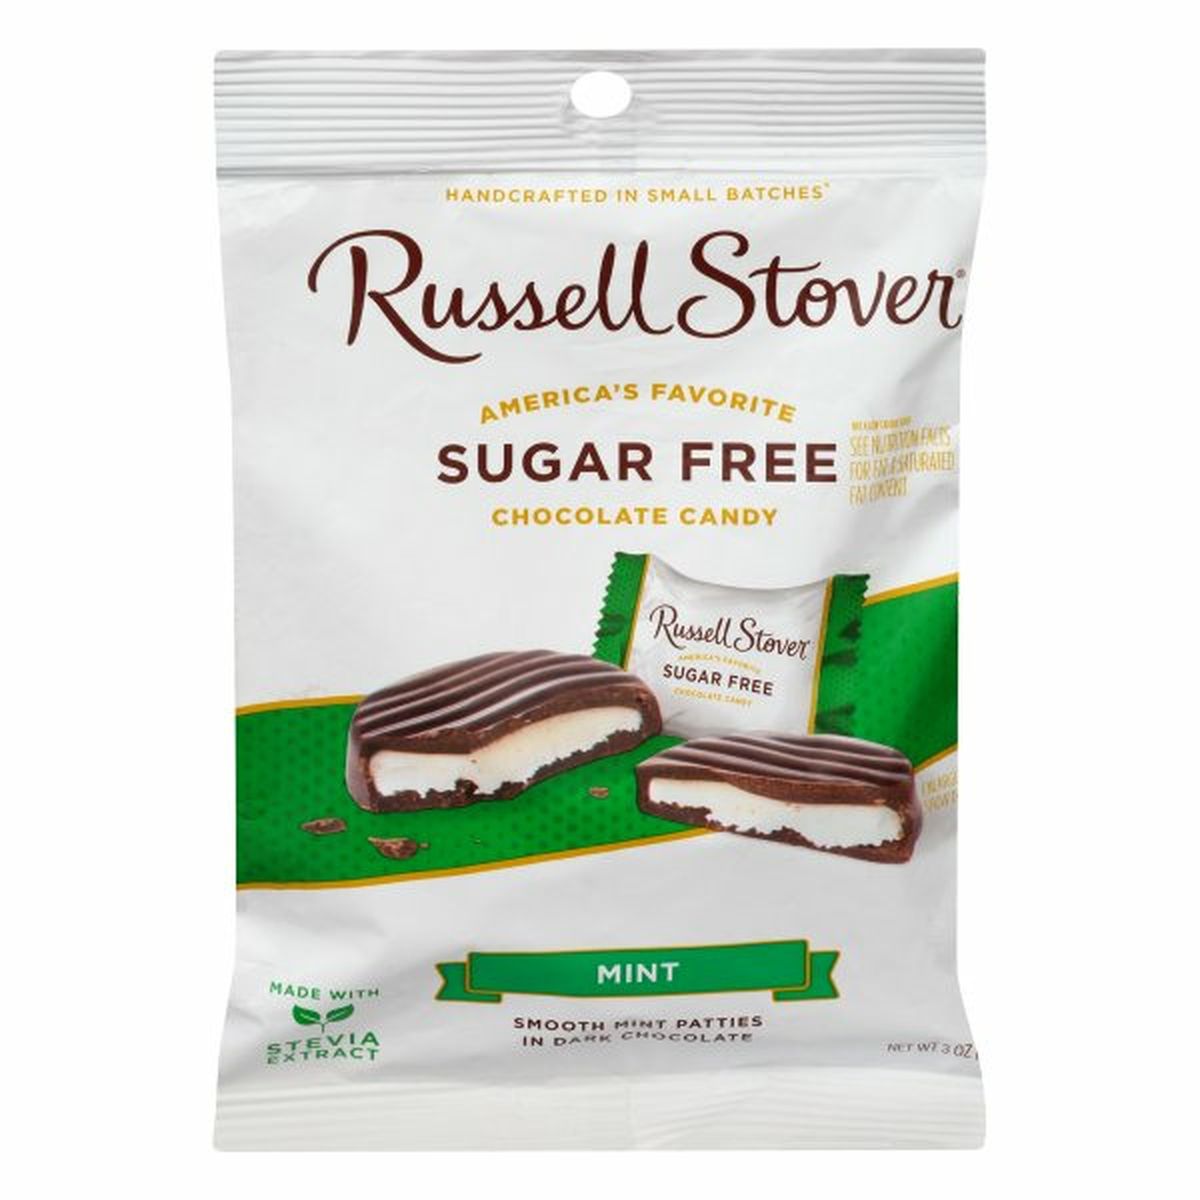 Calories in Russell Stover Chocolate Candy, Sugar Free, Mint